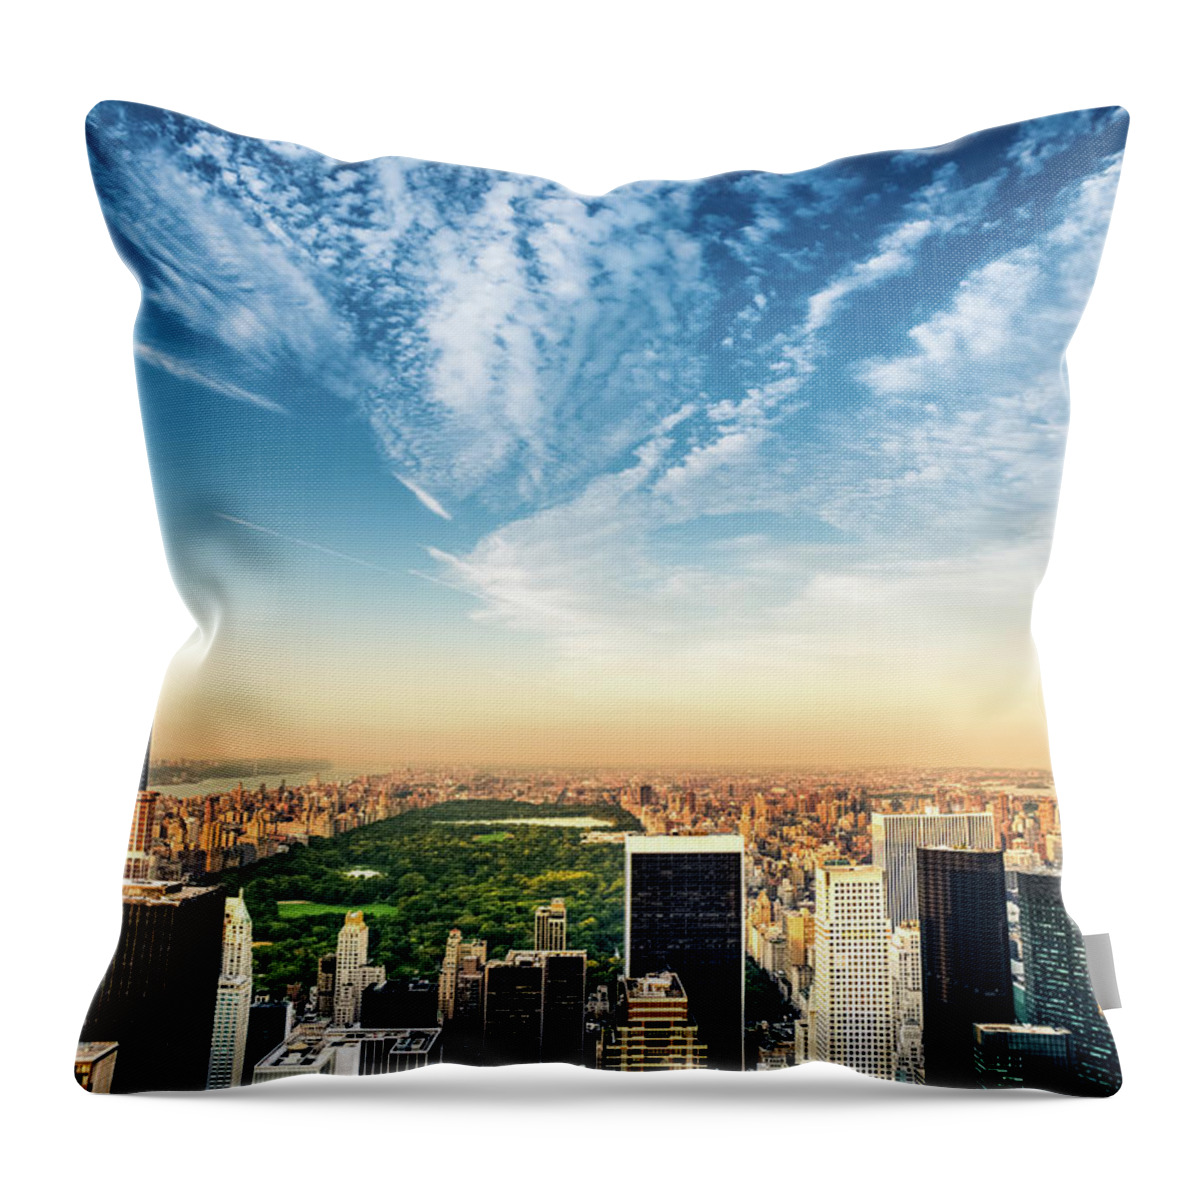 Central Park Throw Pillow featuring the photograph Central Park New York by Ferrantraite